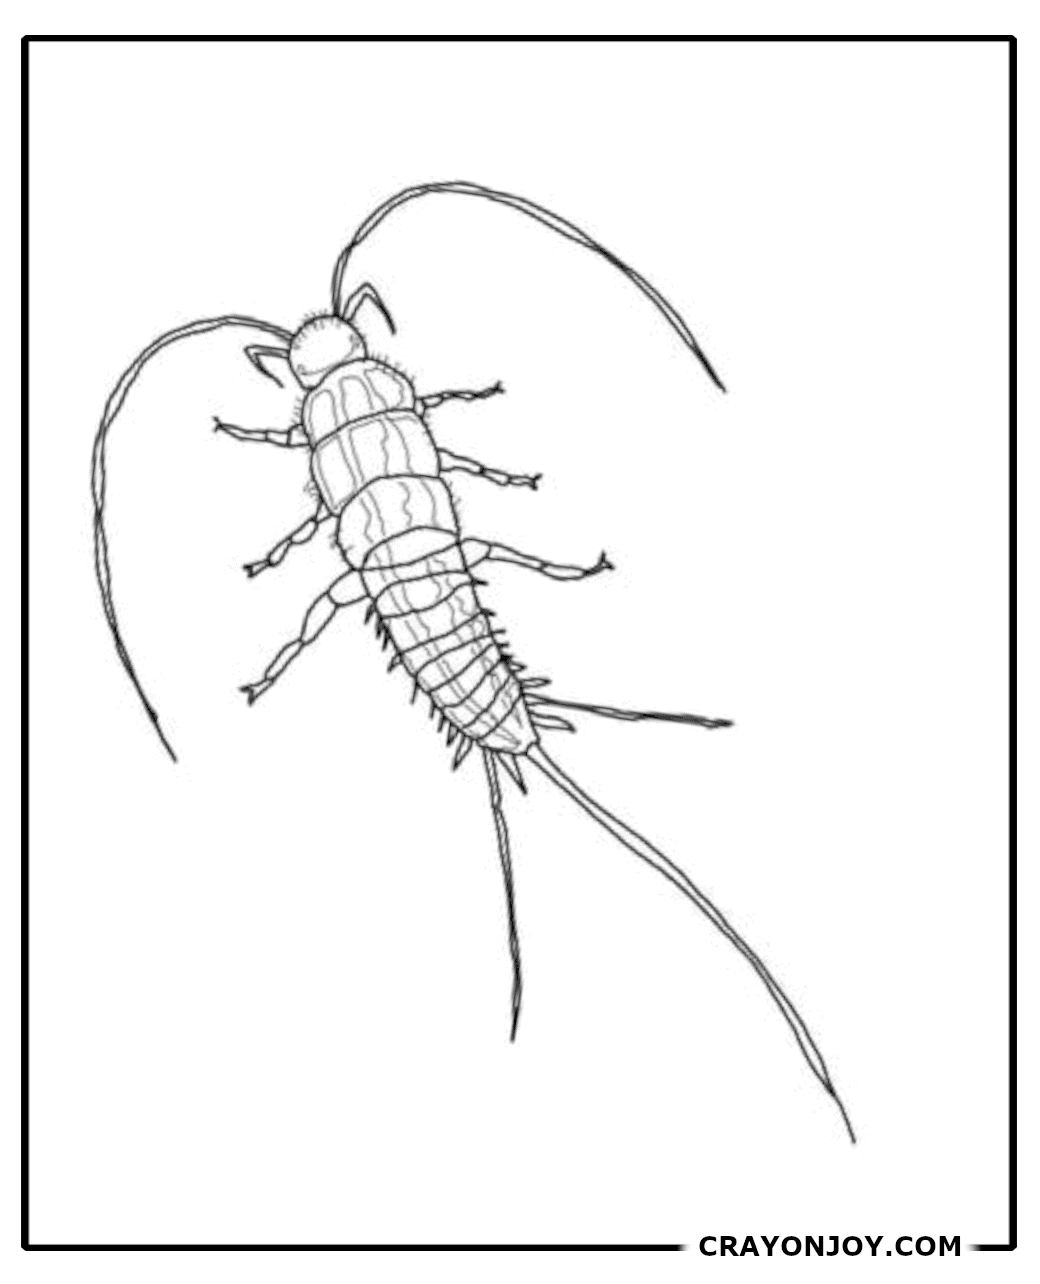 Free Printable Silverfish Coloring Pages for Kids & Adults